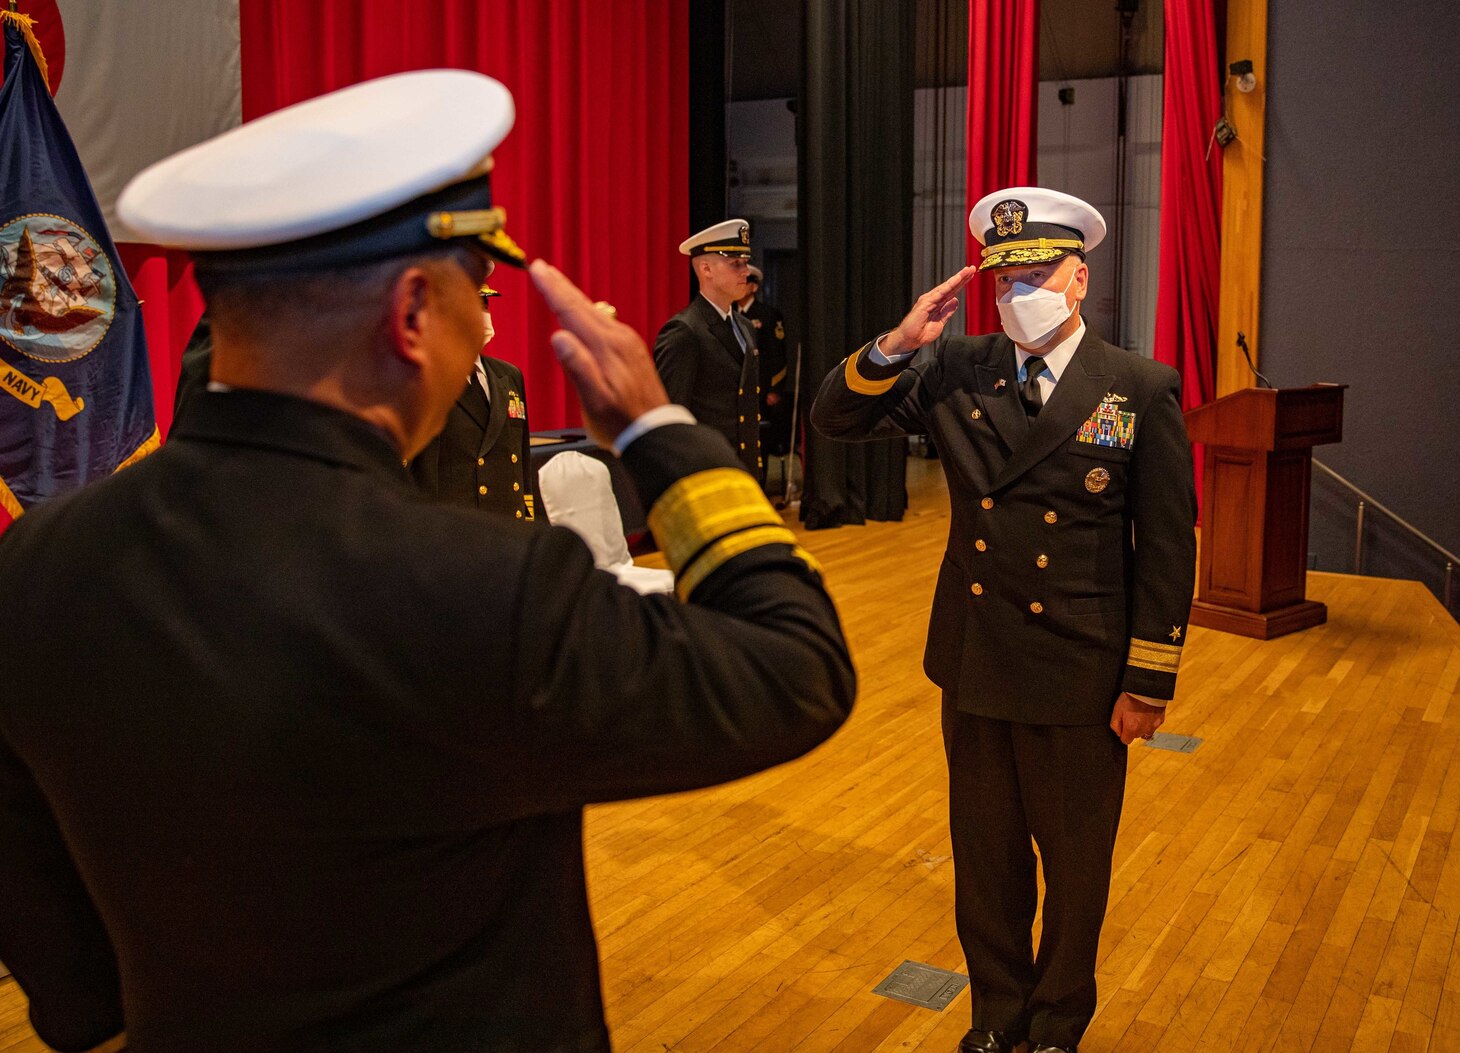 Rear Adm. Rick Seif, right, relieves Rear Adm. Butch Dollaga, left, as commander, Submarine Group 7 during the Submarine Group 7 change of command ceremony at Commander, Fleet Activities Yokosuka, Japan, on April 13, 2022. Submarine Group 7 directs forward-deployed, combat capable forces across the full spectrum of undersea warfare throughout the Western Pacific, Indian Ocean, and Arabian Sea.